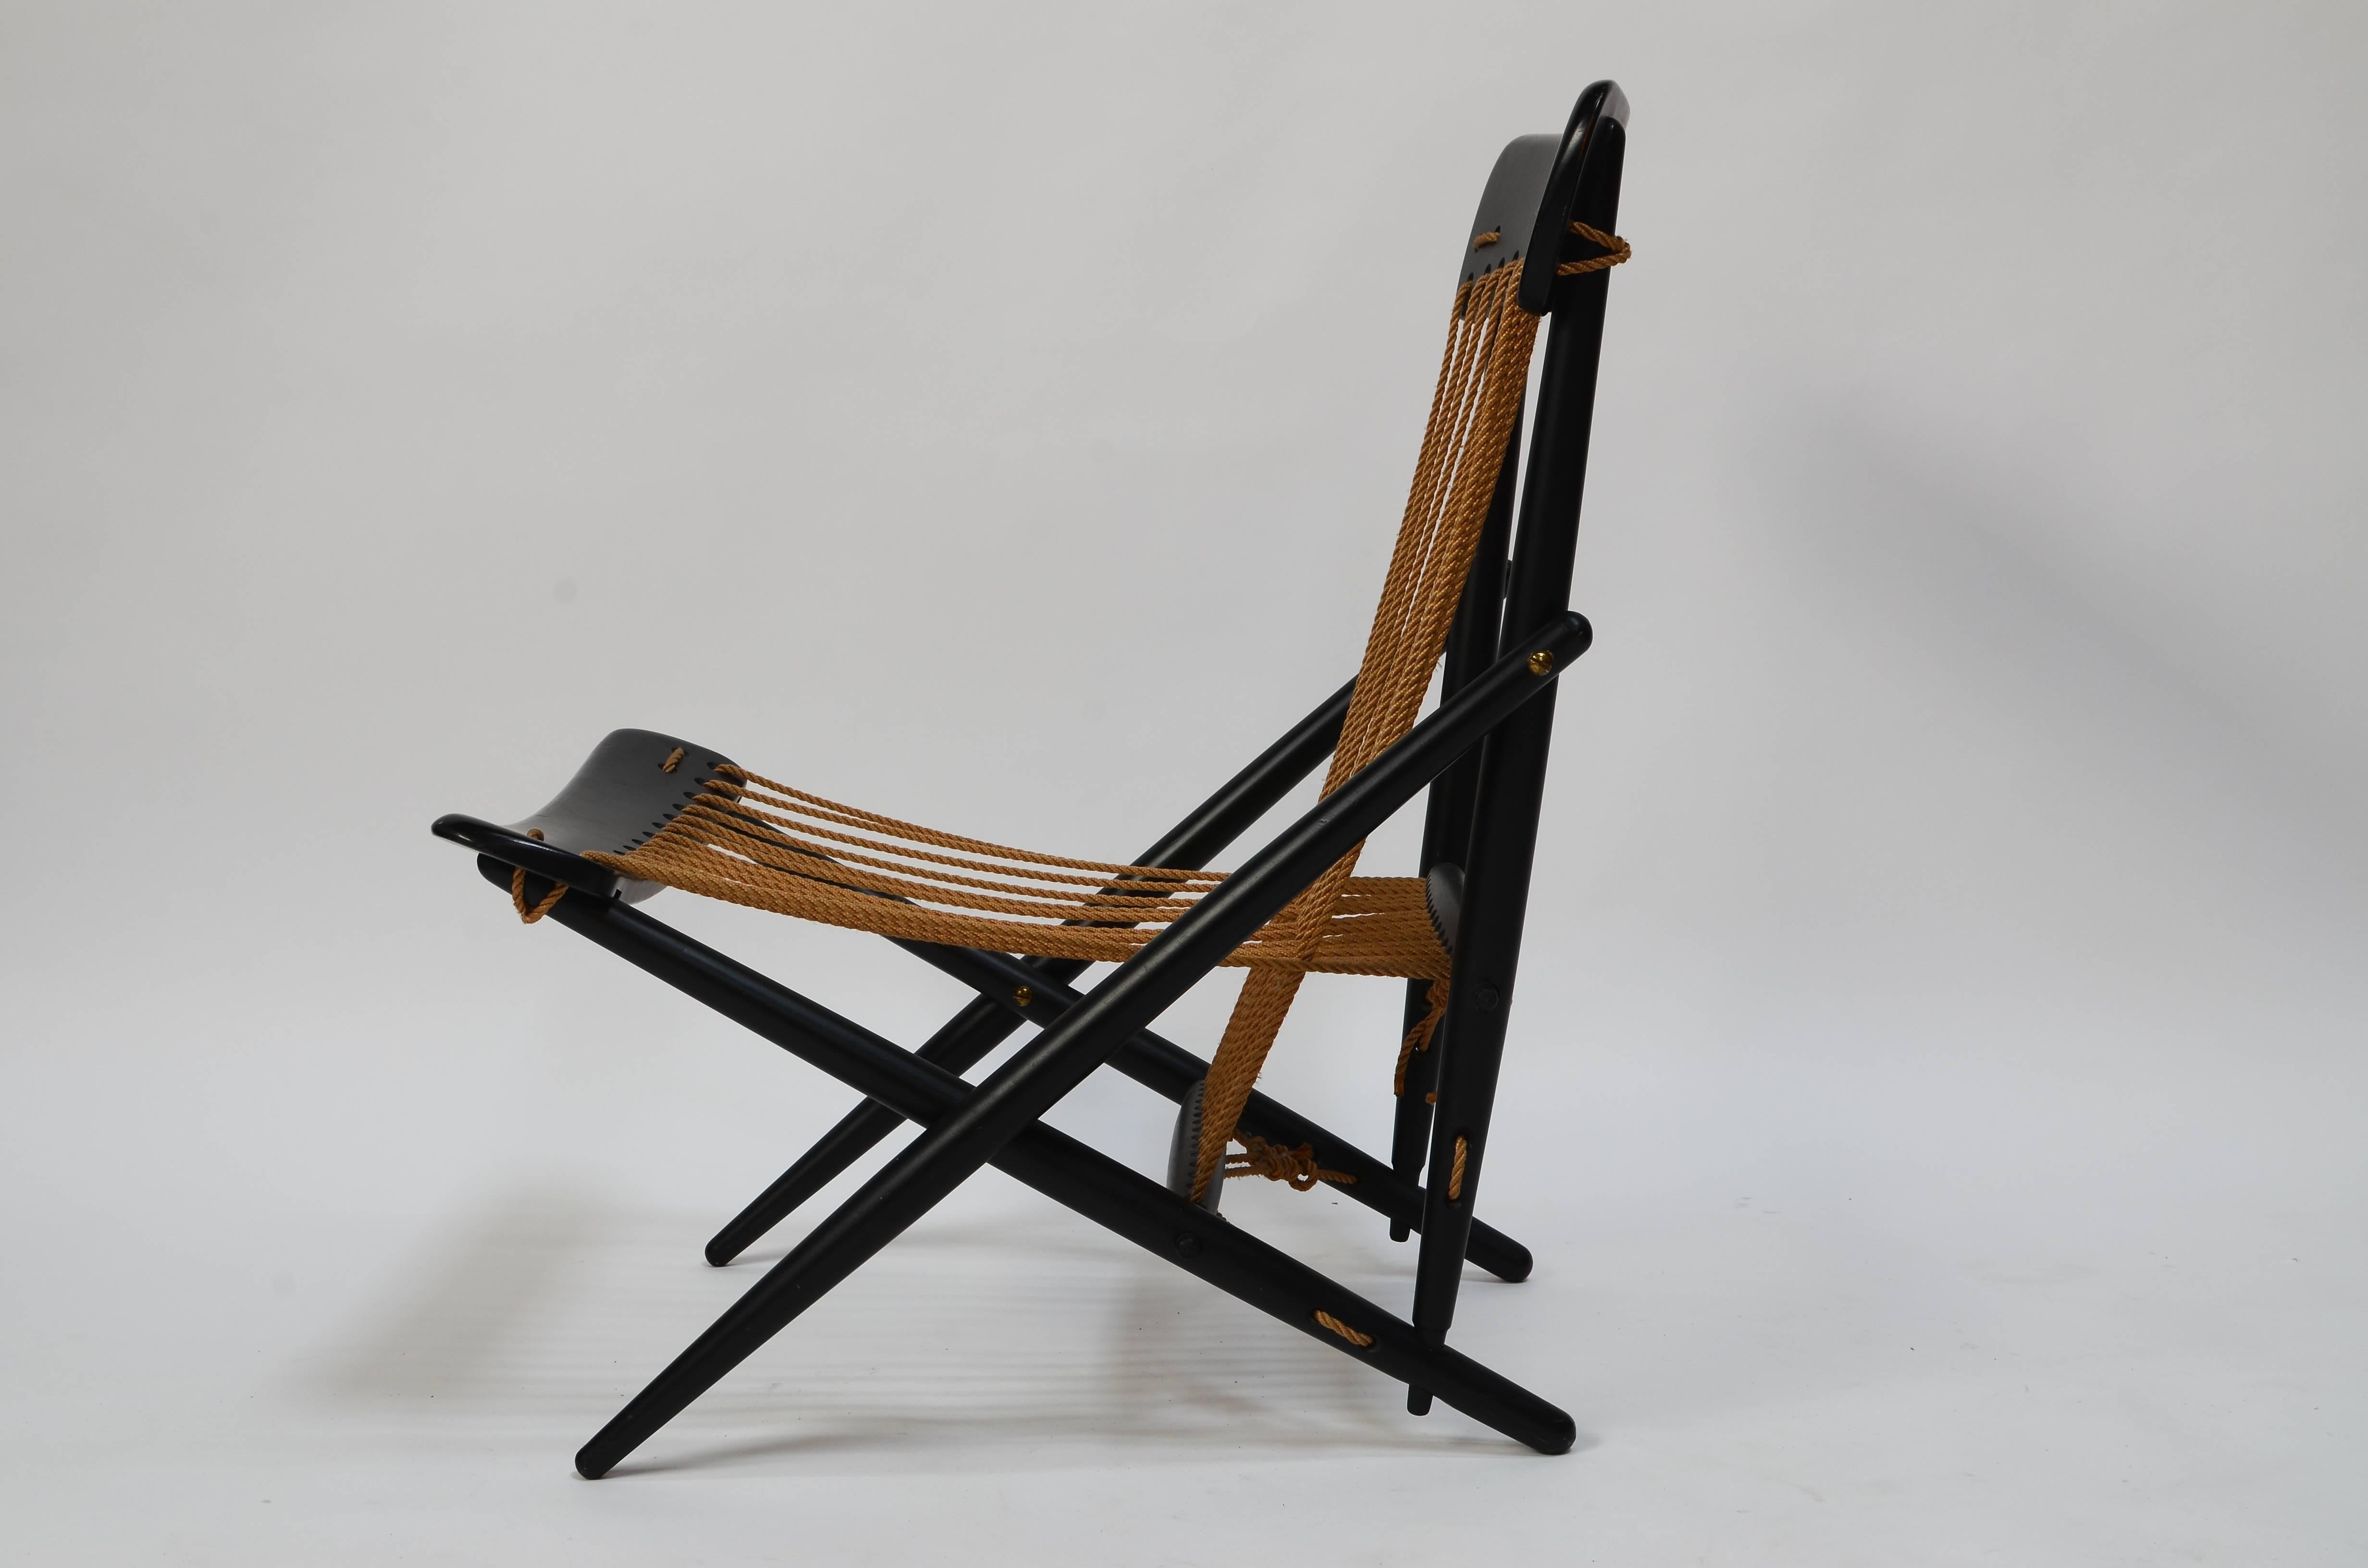 Stunning minimalist design of wood, rope and brass. Very well made and sturdy. Truly a sculptural work of art. This chair was purchased by a US Navy commander in Japan and brought to the states in the 1950s.